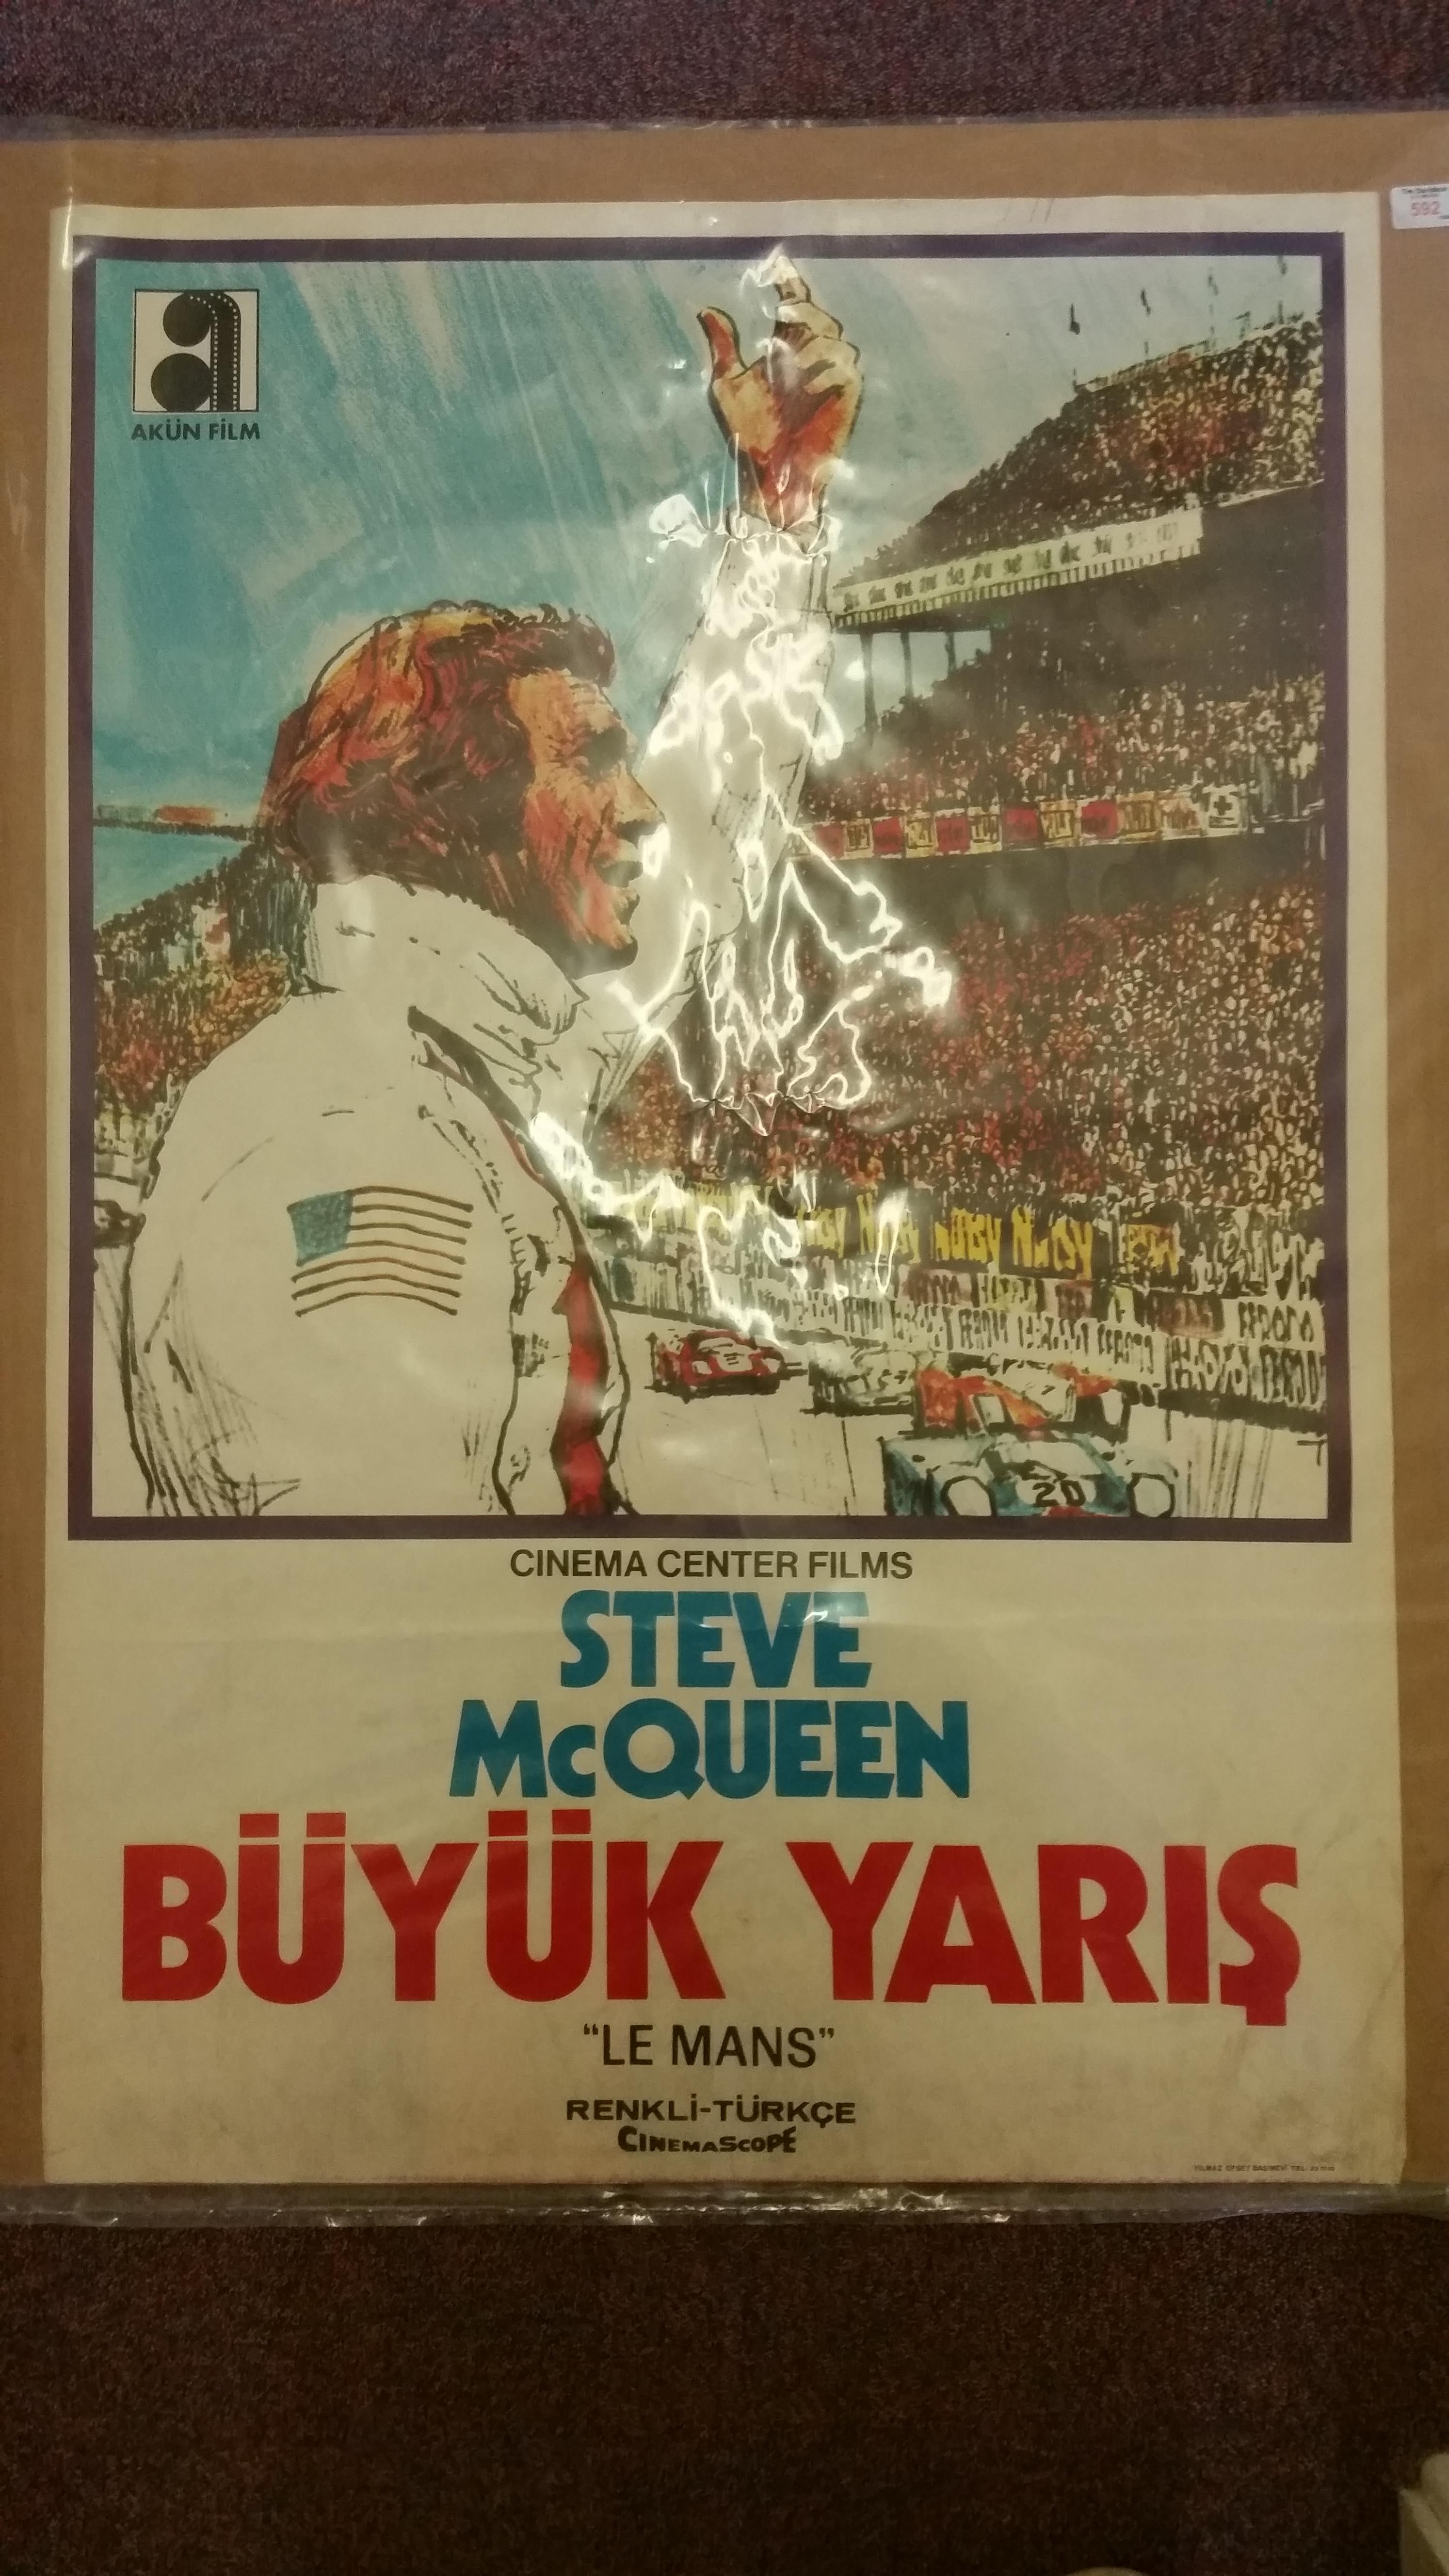 CINEMA, poster, Le Mans, well illustrated showing Steve McQueen, foreign language, scuffing to